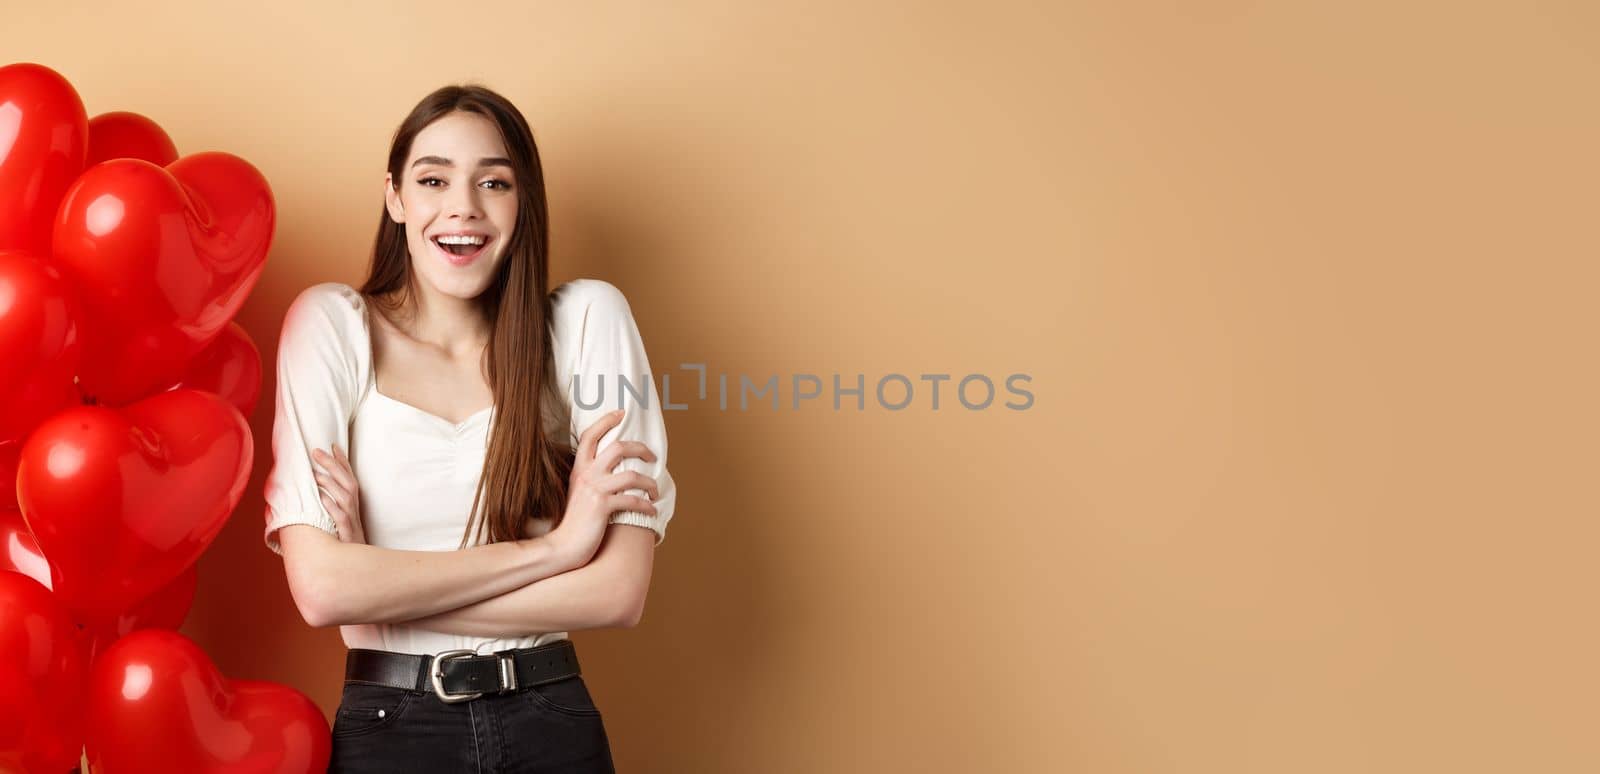 Valentines day concept. Beautiful young woman having fun, laughing and smiling at camera, standing near romantic heart balloons, beige background.